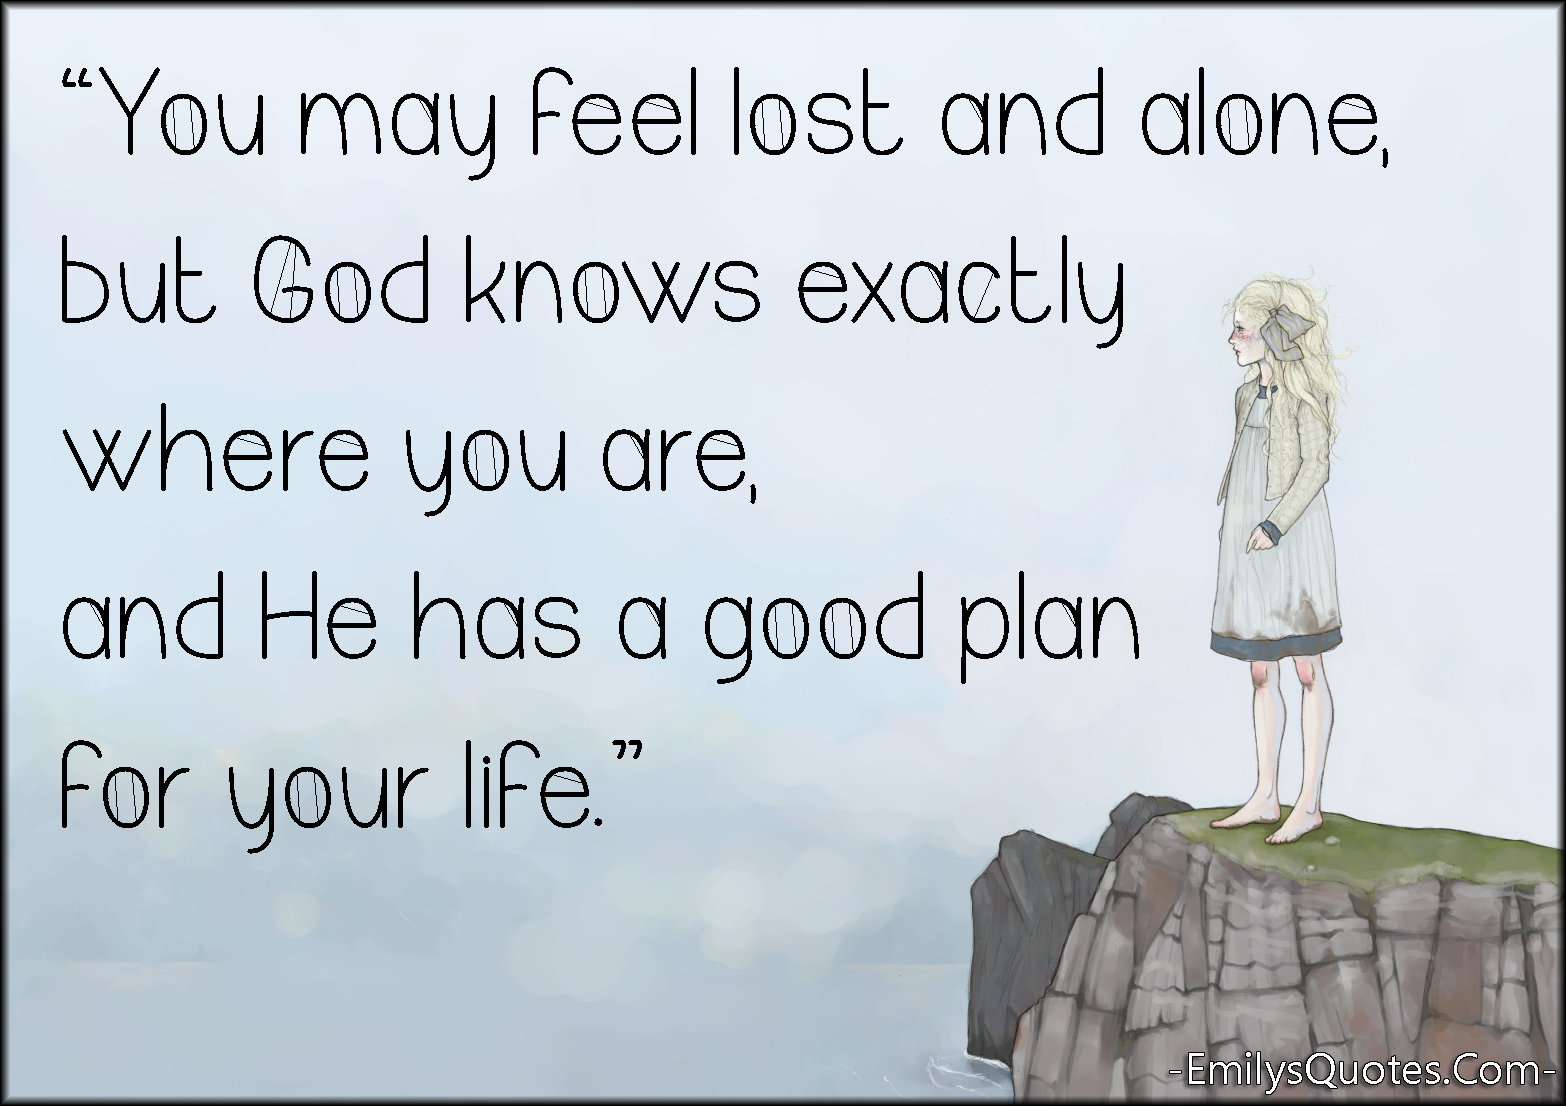 I know exactly. Feel Lost. Lost Alone. You might lose. Naomi - God knows what God knows.